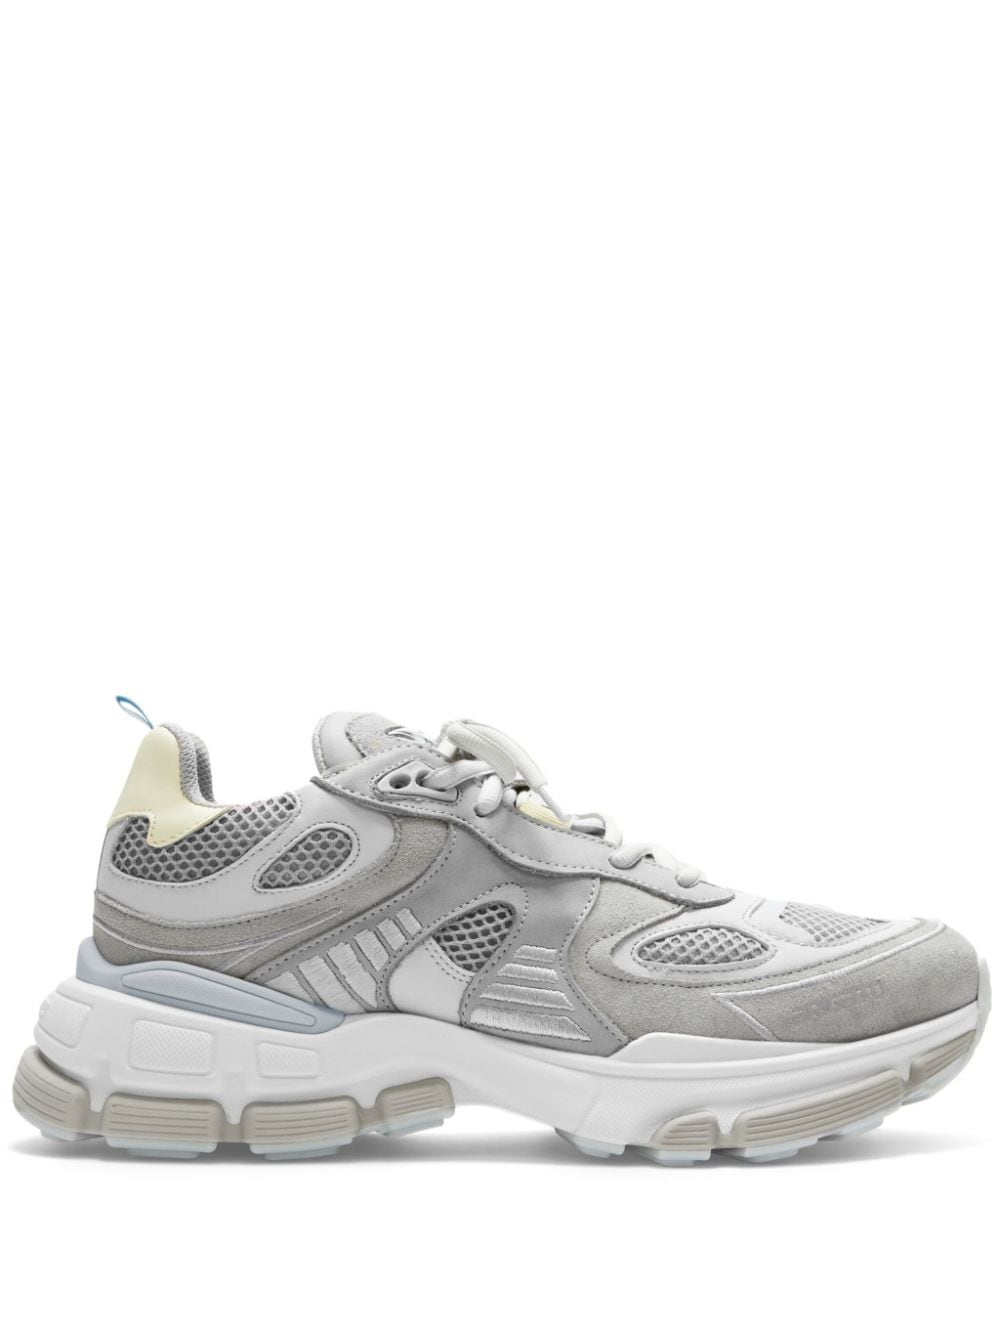 Axel Arigato Sphere Runner lace-up sneakers - Grey von Axel Arigato